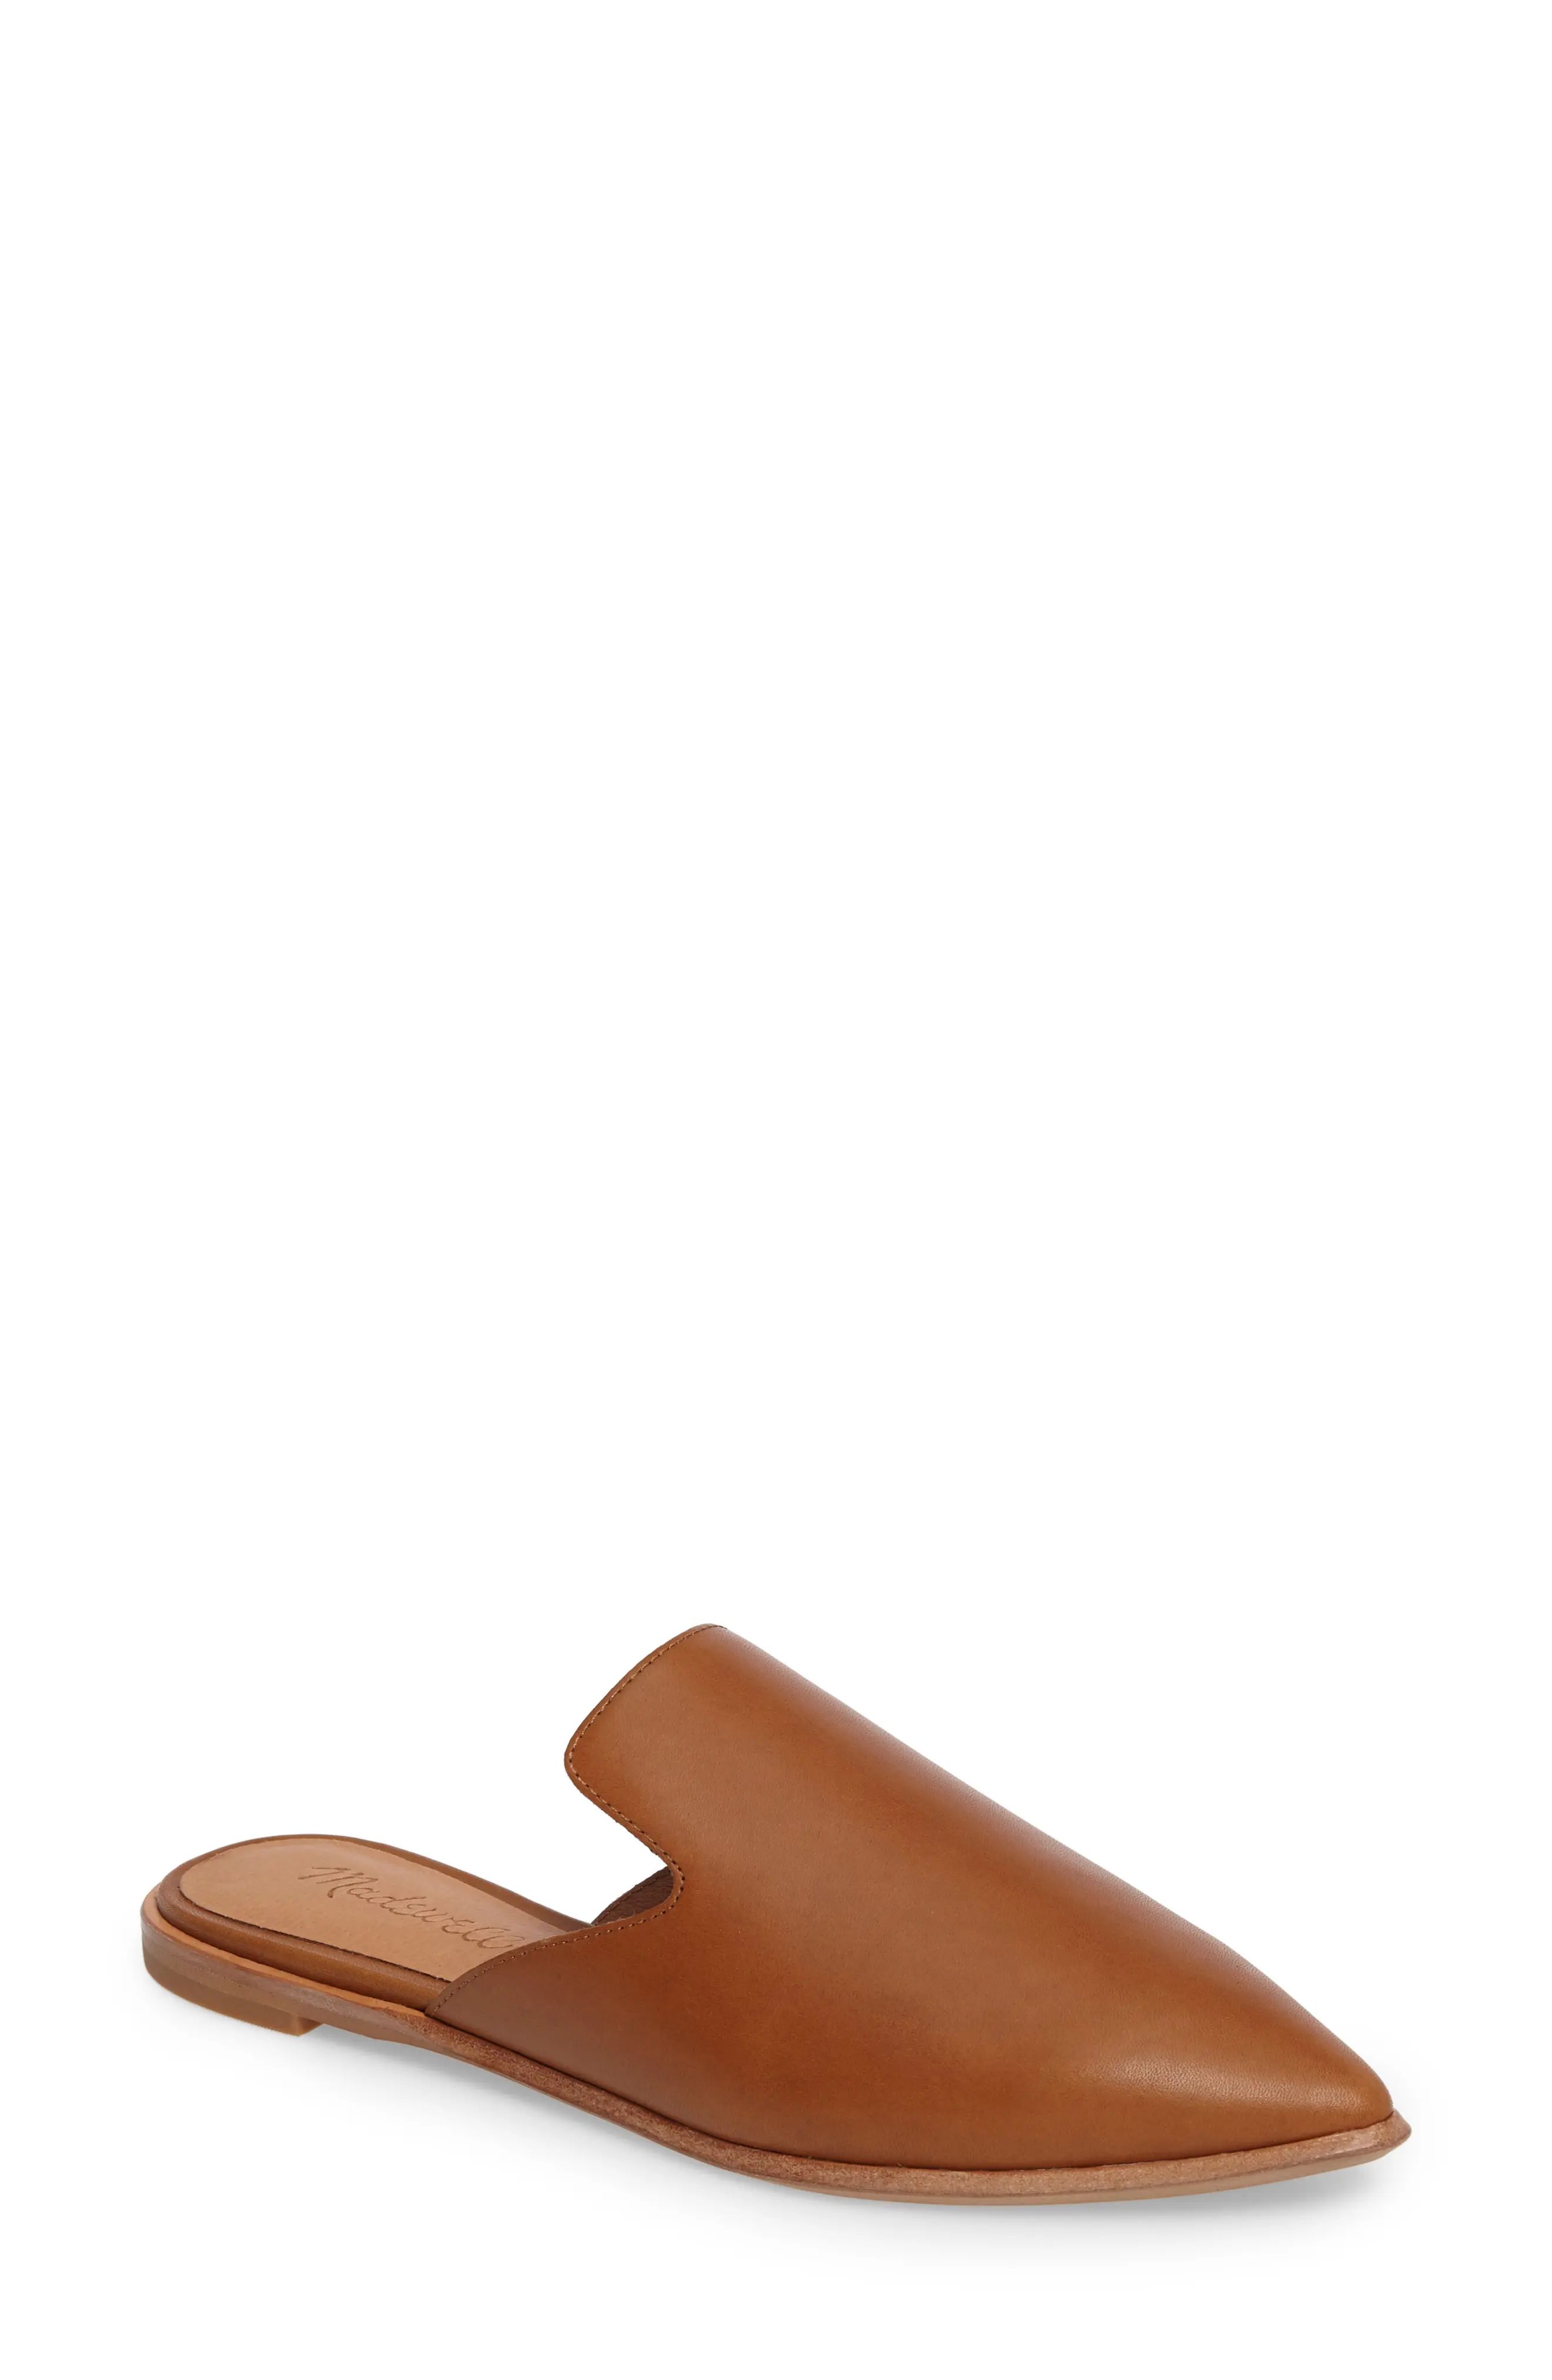 Women's Madewell The Gemma Mule, Size 5 M - Brown | Nordstrom